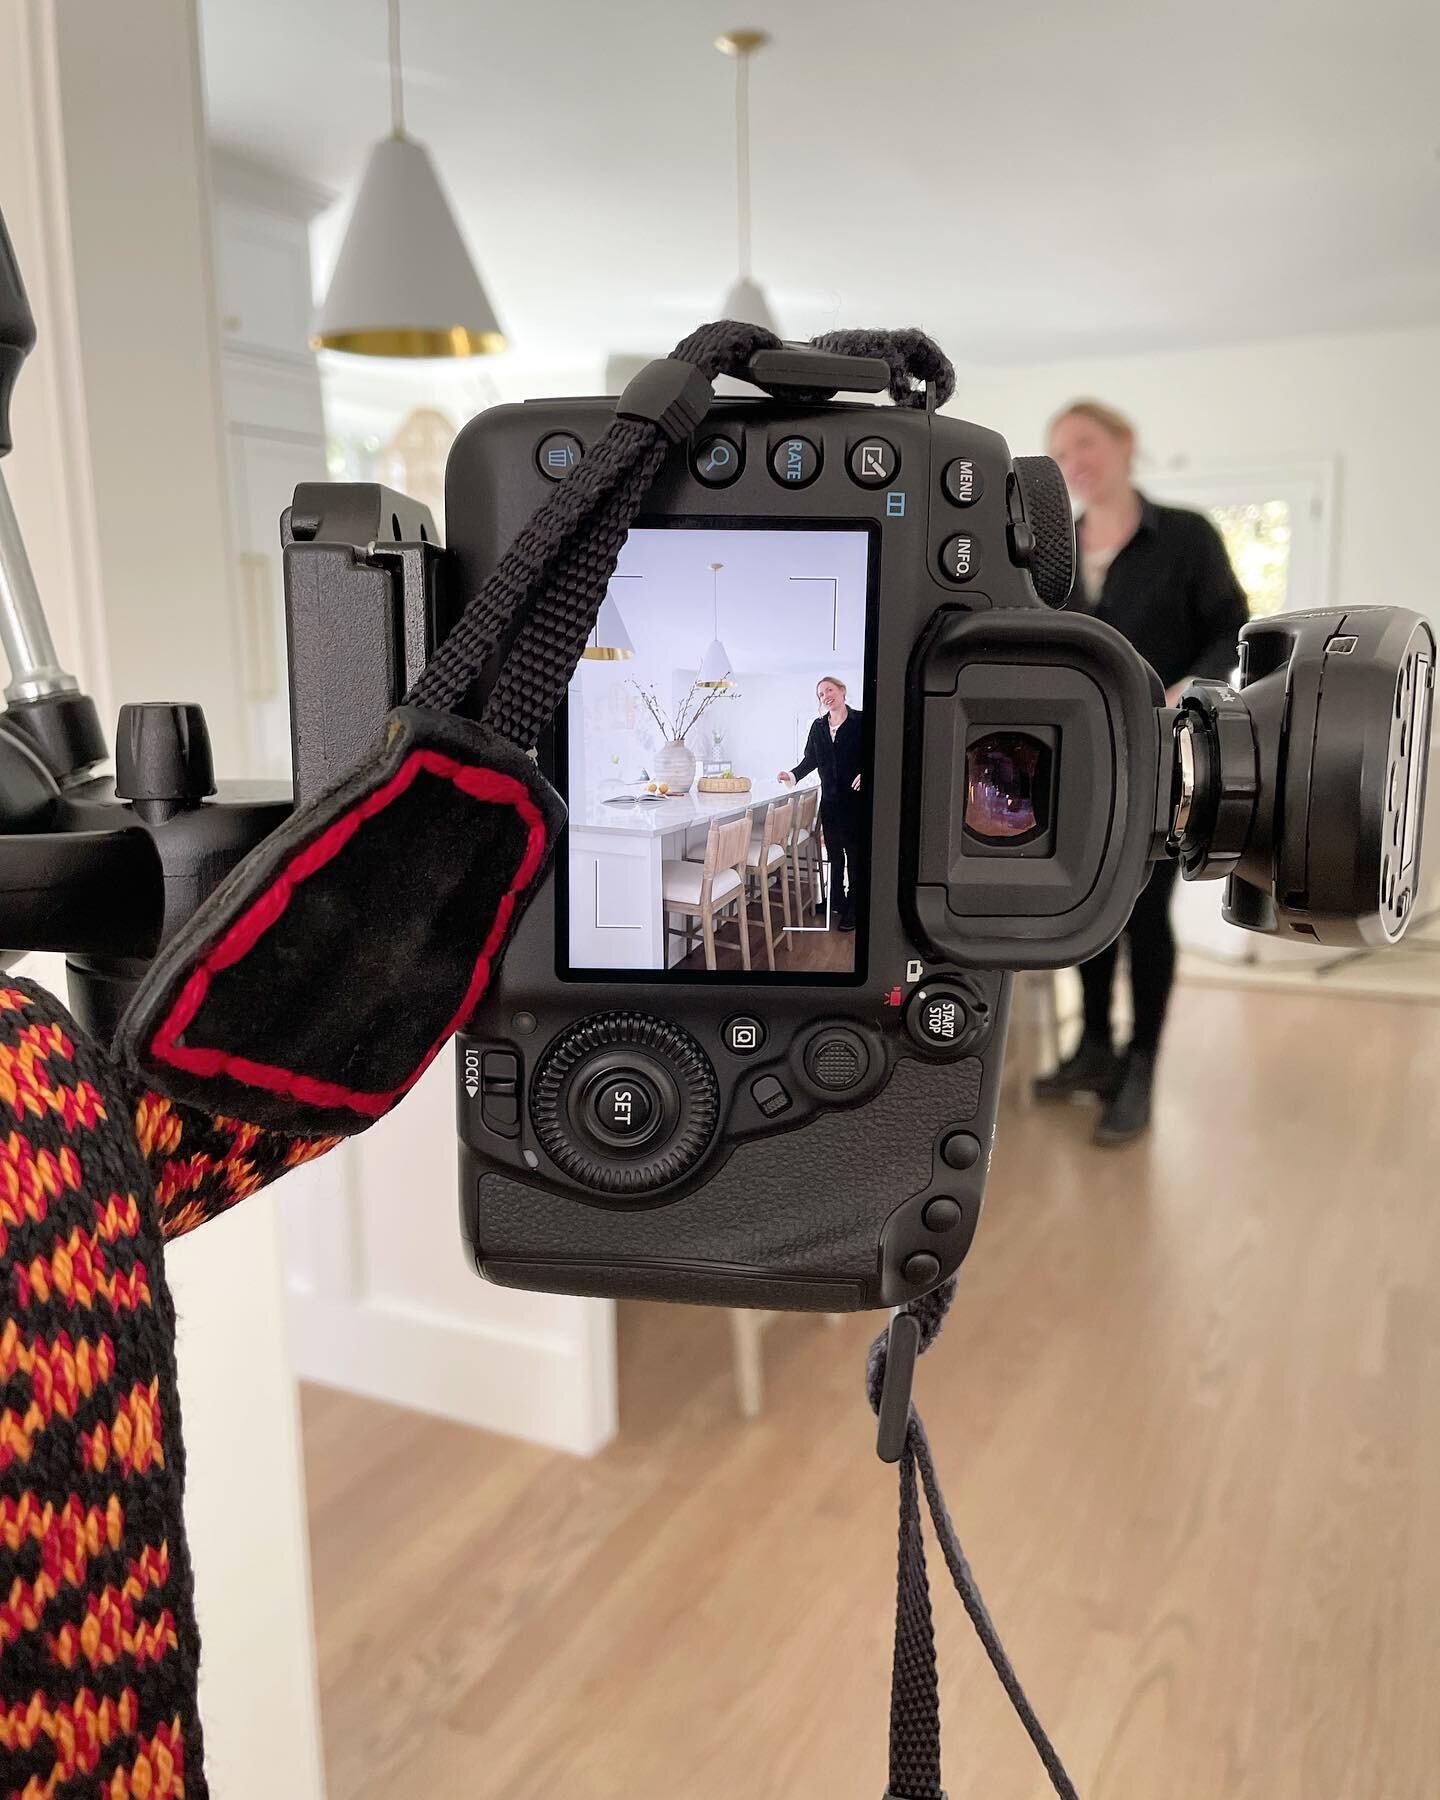 Yesterday was one of those awesome, busy days that reminded me why I love doing this.

Had a photoshoot where my client happily opened her home, no questions asked. Spent hours with my photographer enjoying the process, bouncing ideas off each other,